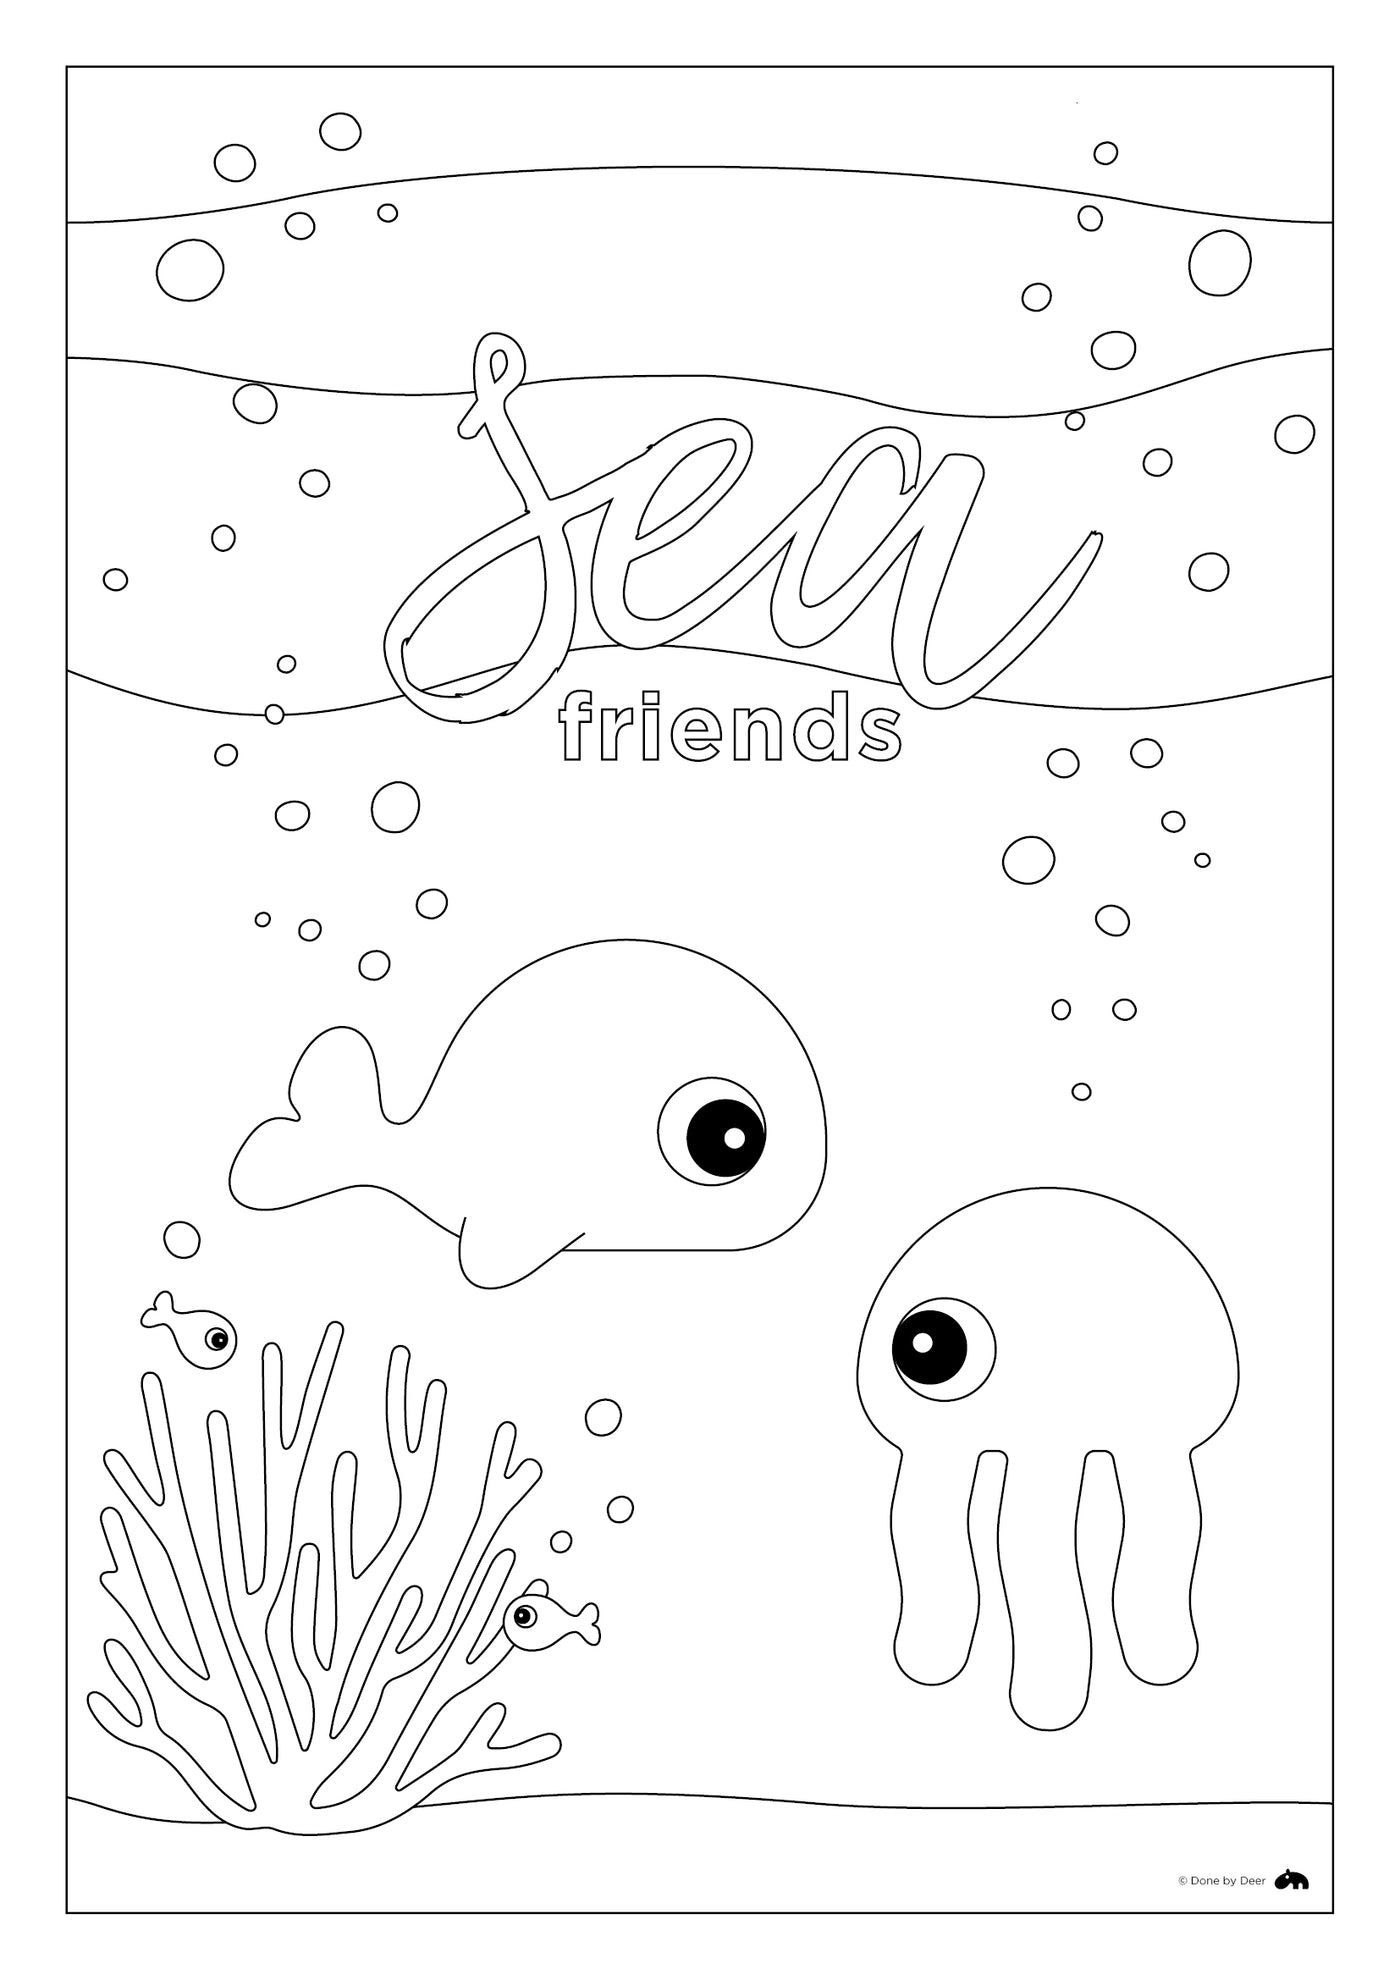 https://www.donebydeer.com/Files/Images/Say-hello/Play-Create/Drawing_Seafriends.pdf